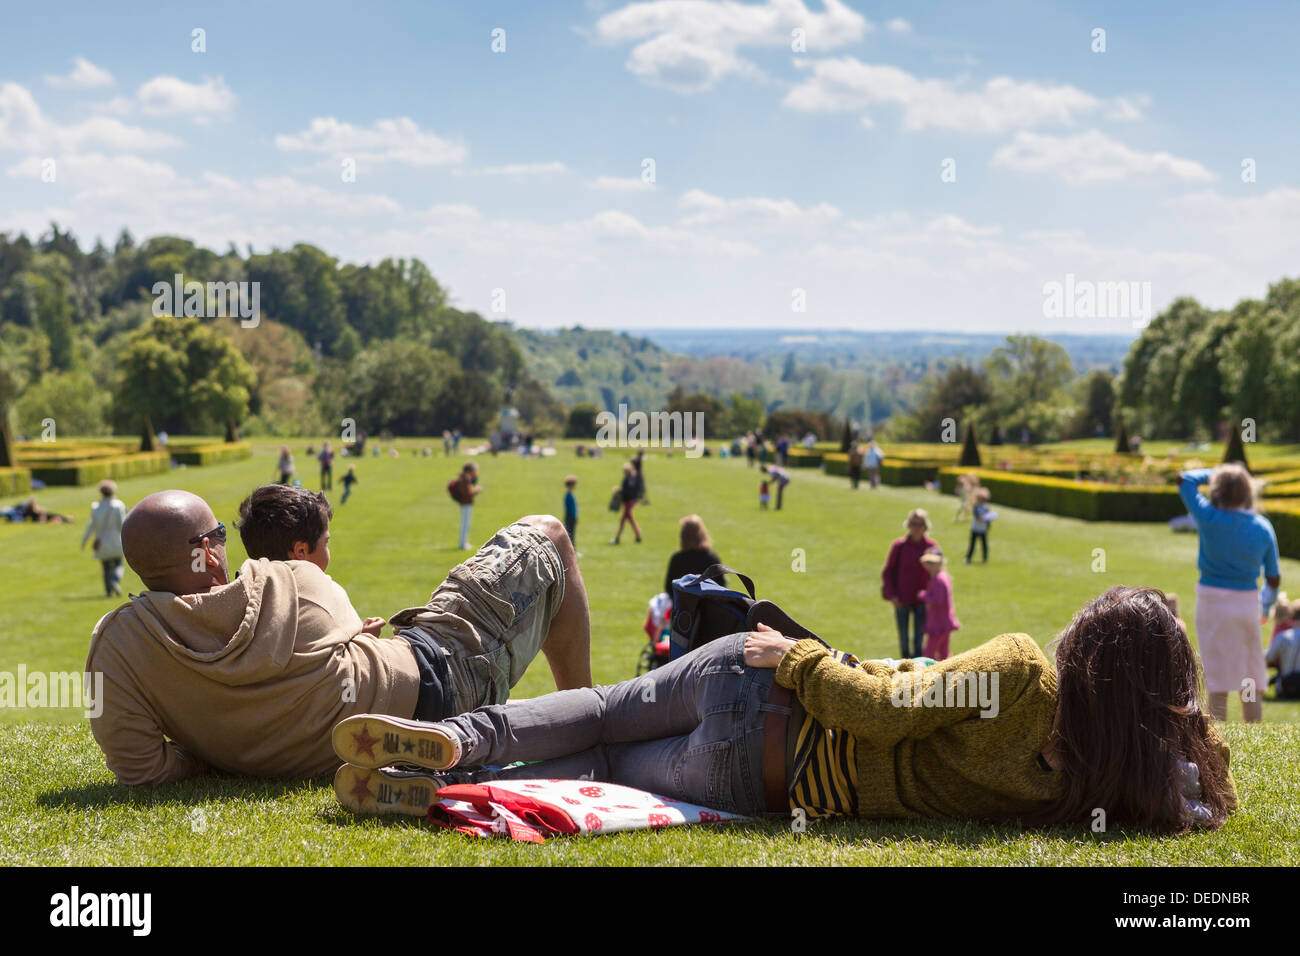 A young family enjoying a beautiful day at Cliveden gardens, Taplow, Buckinghamshire, England, United Kingdom, Europe Stock Photo